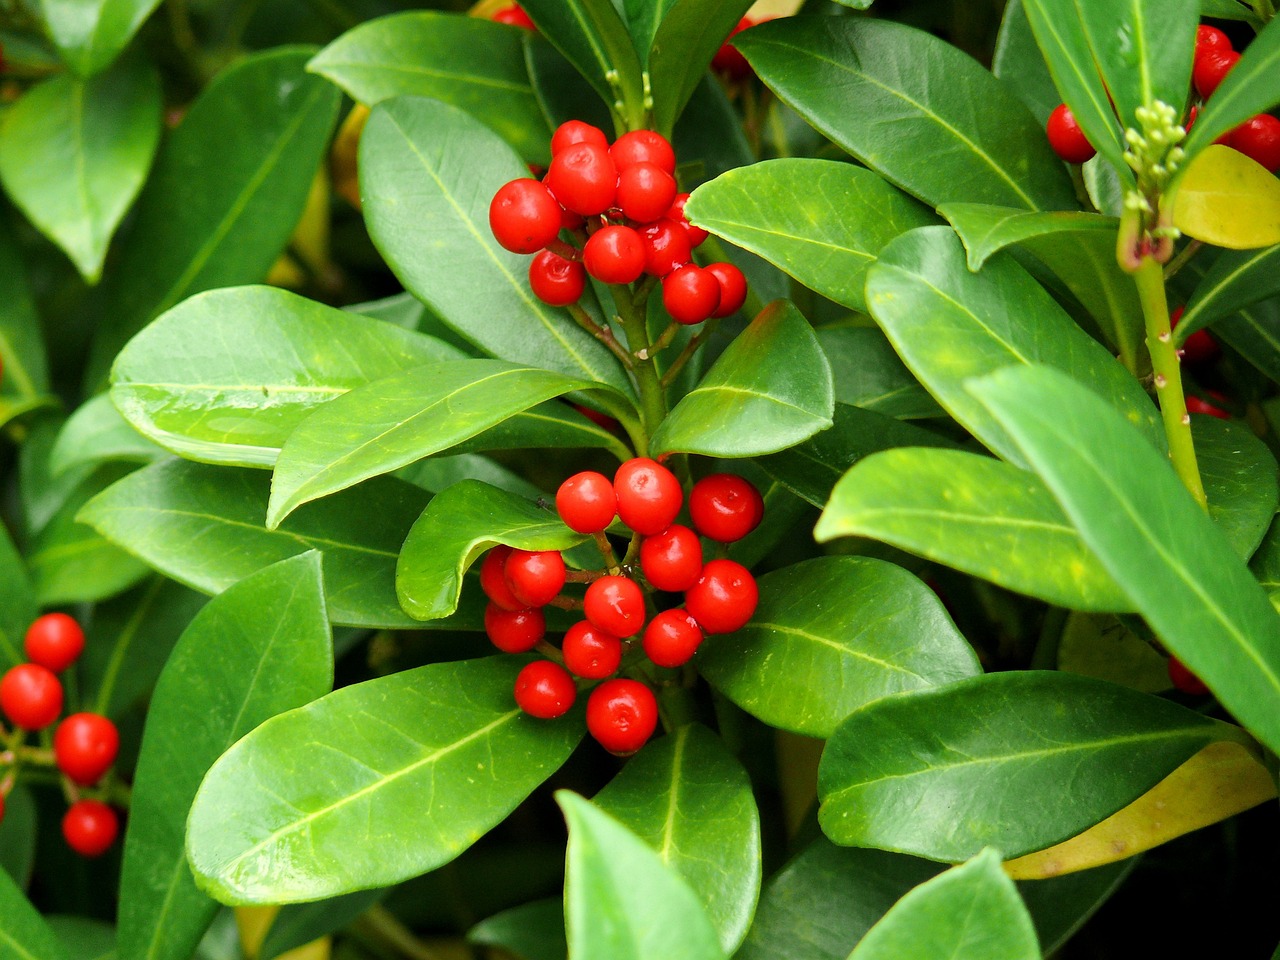 Lush American Holly bush with clusters of bright red berries nestled among glossy green leaves.